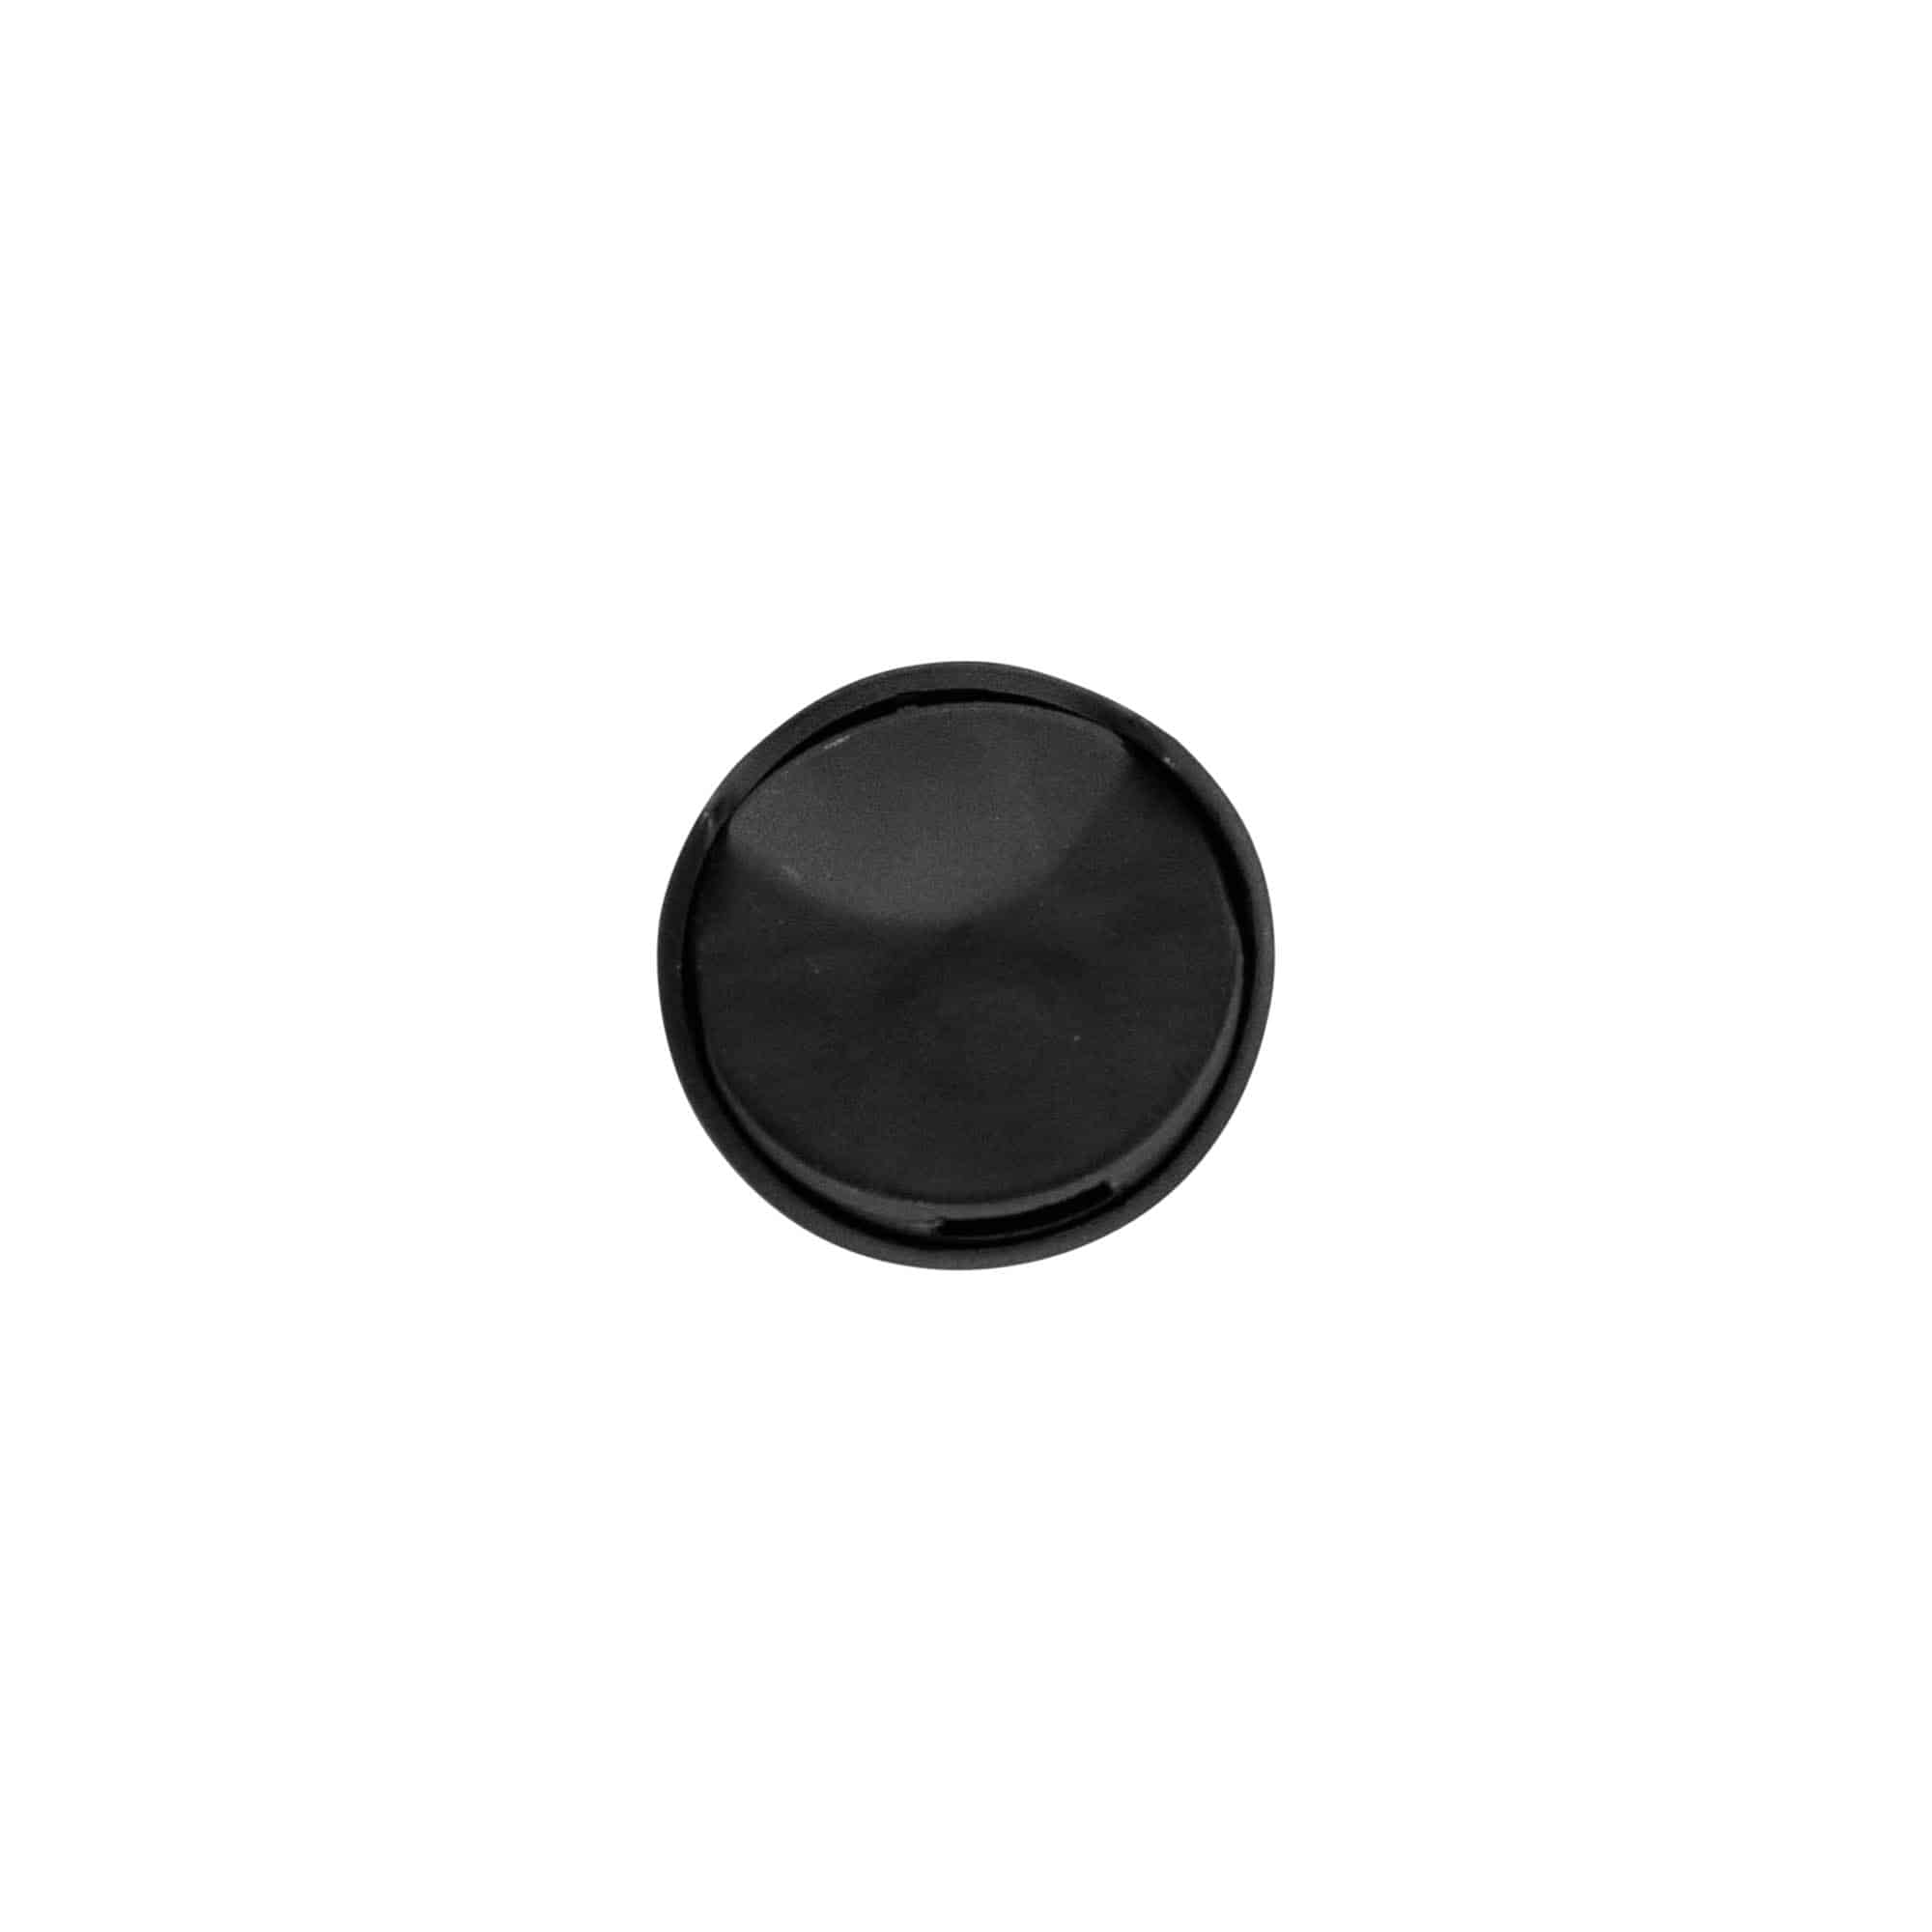 Screw cap with disc top, PP plastic, black, for opening: GPI 24/410